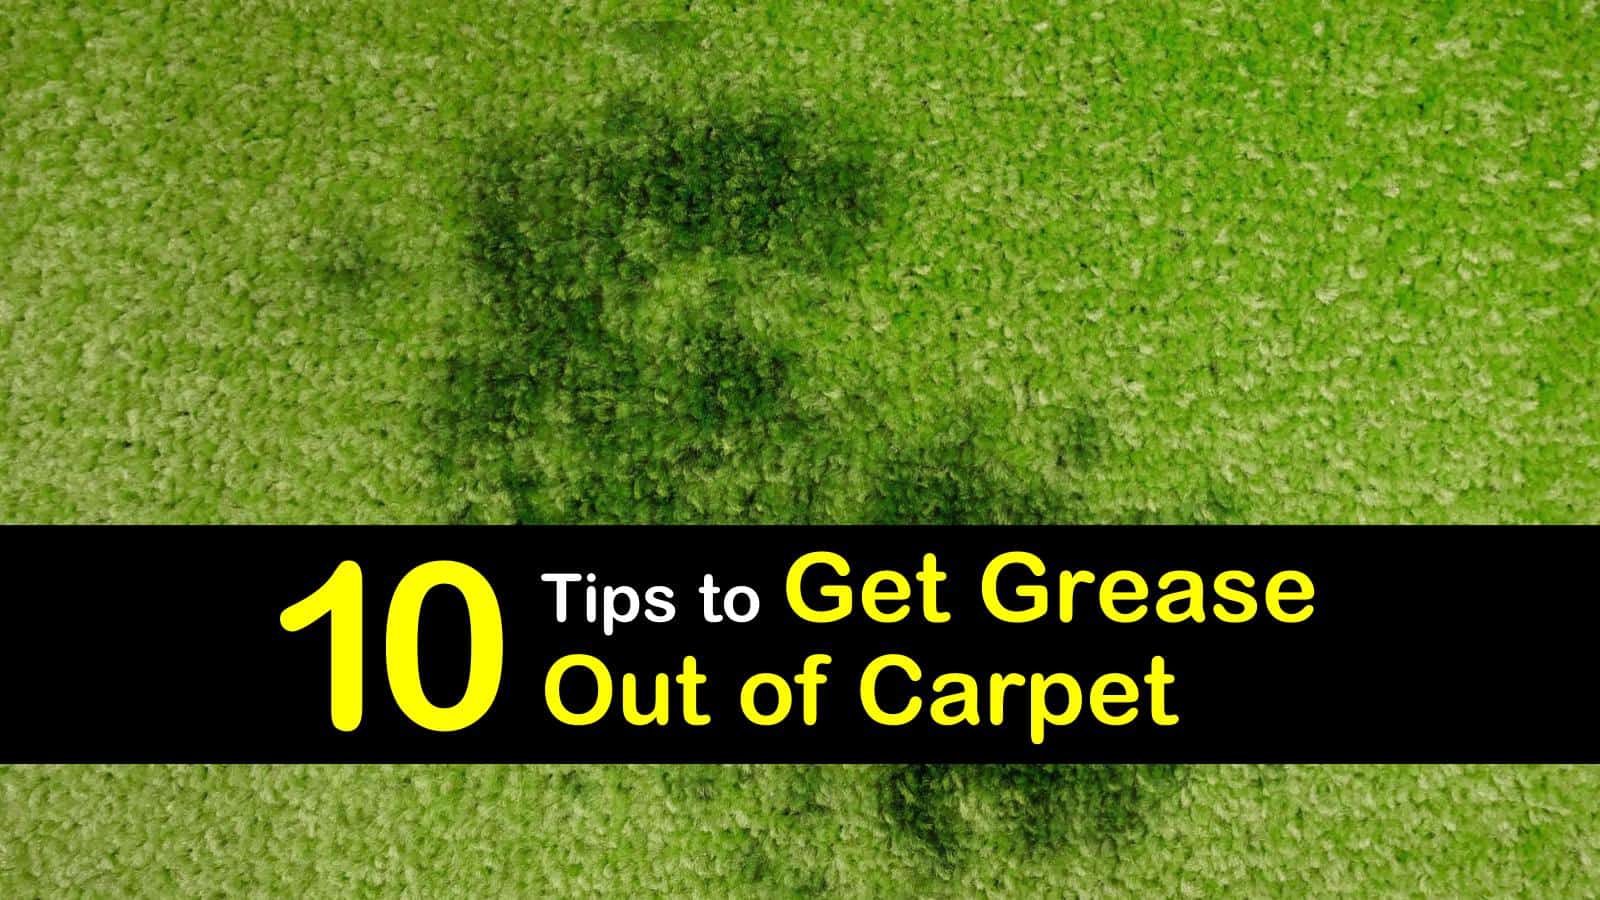 how to get grease out of carpet titleimg1